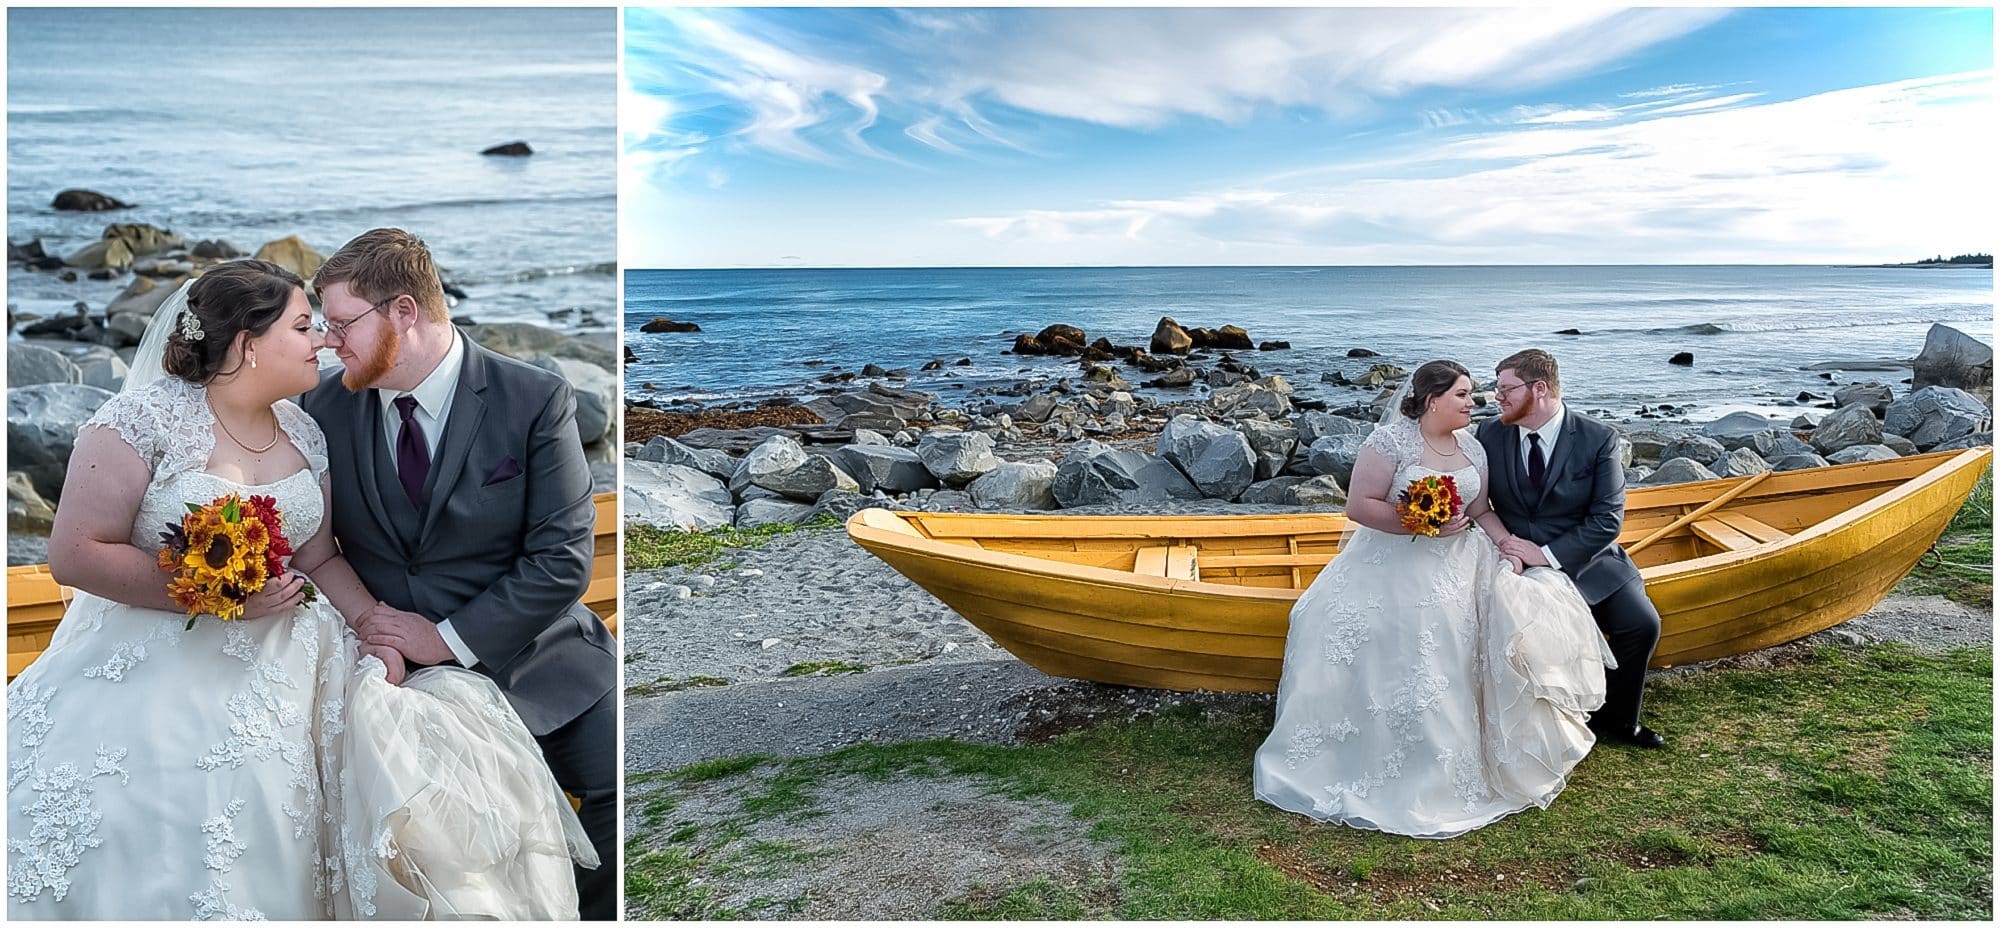 The bride and groom sit on a yellow boat posing for their wedding photos at White Point in NS.